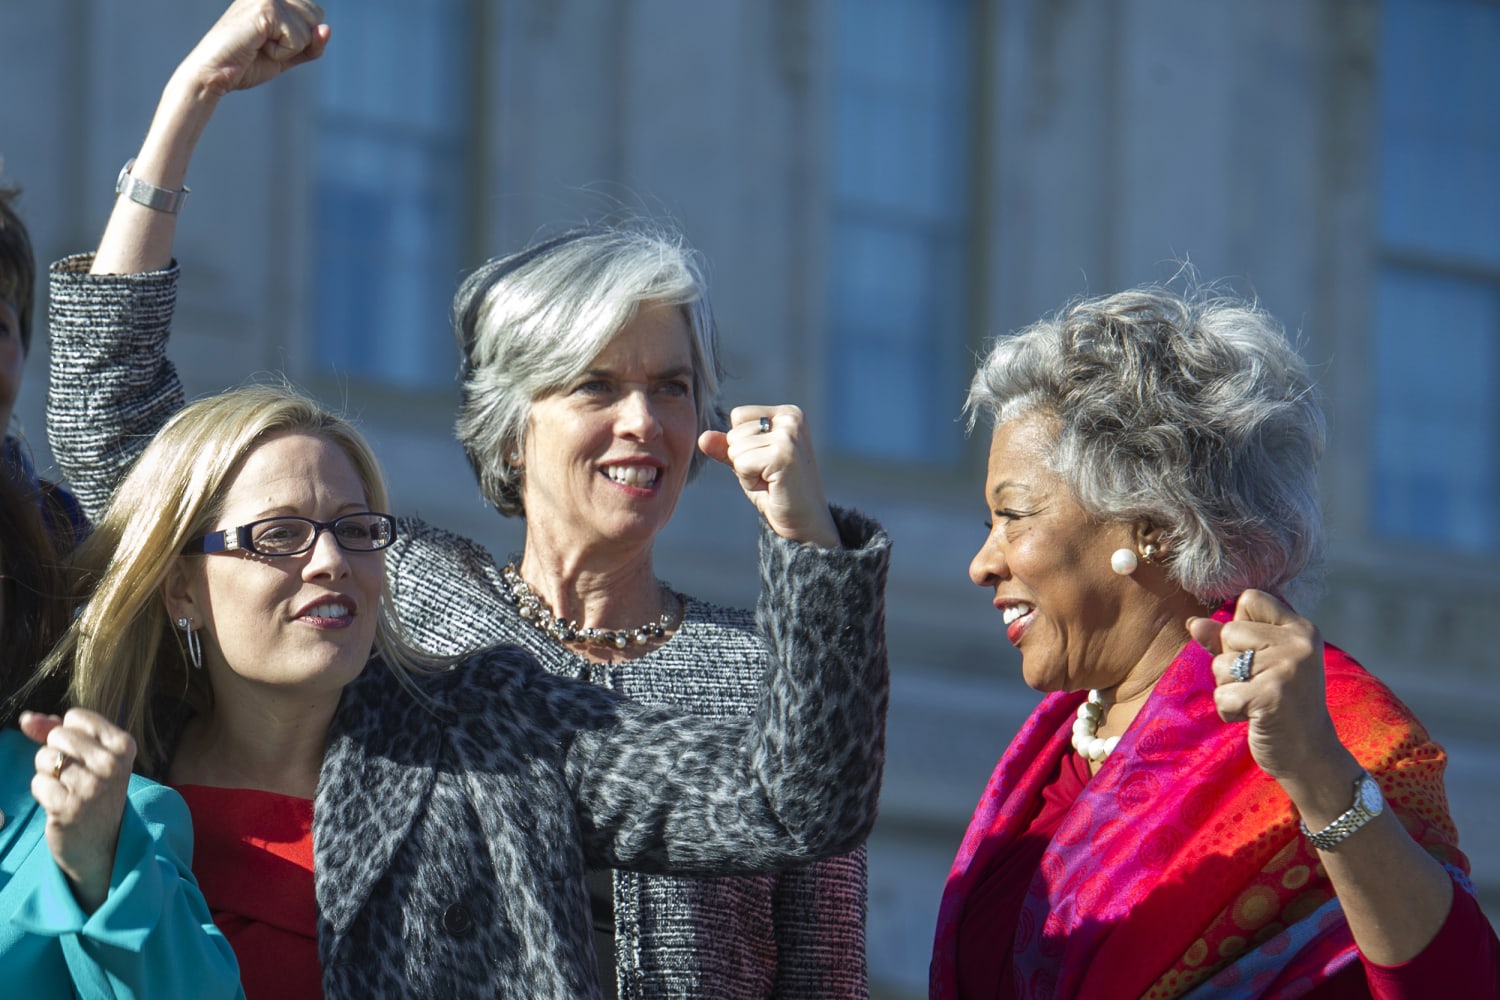 I want my voice heard': Women plot runs for office in record numbers